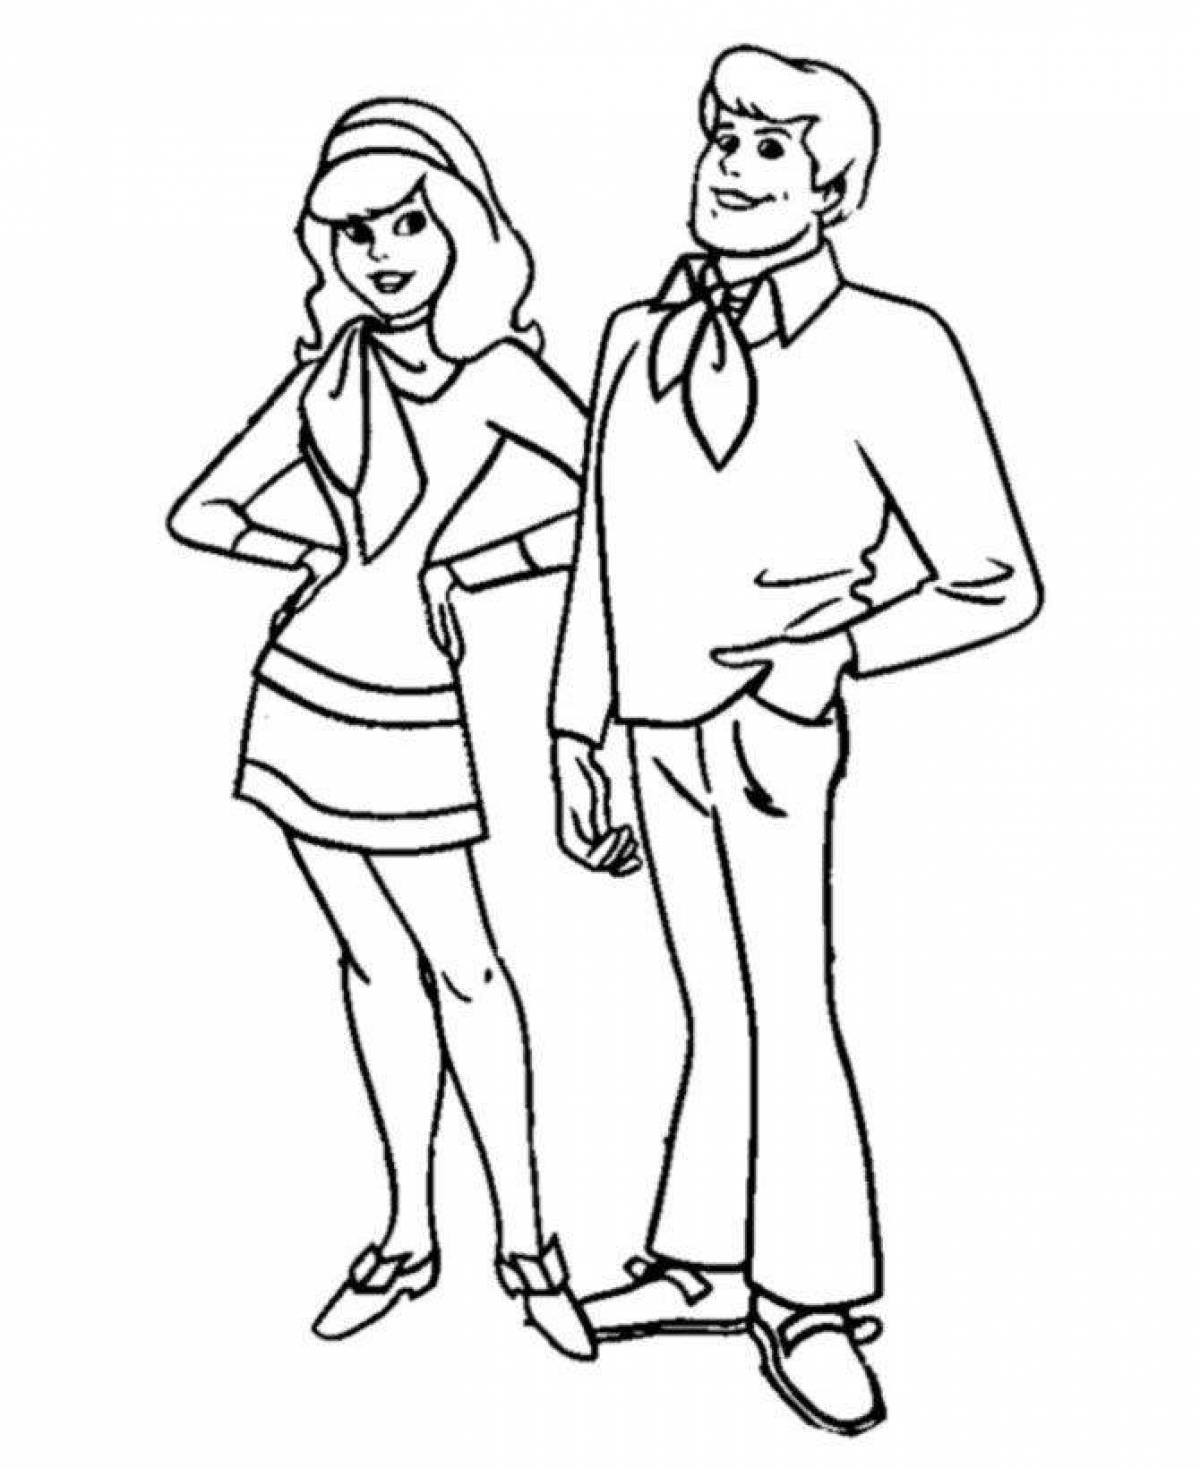 Coloring page religious wife and husband